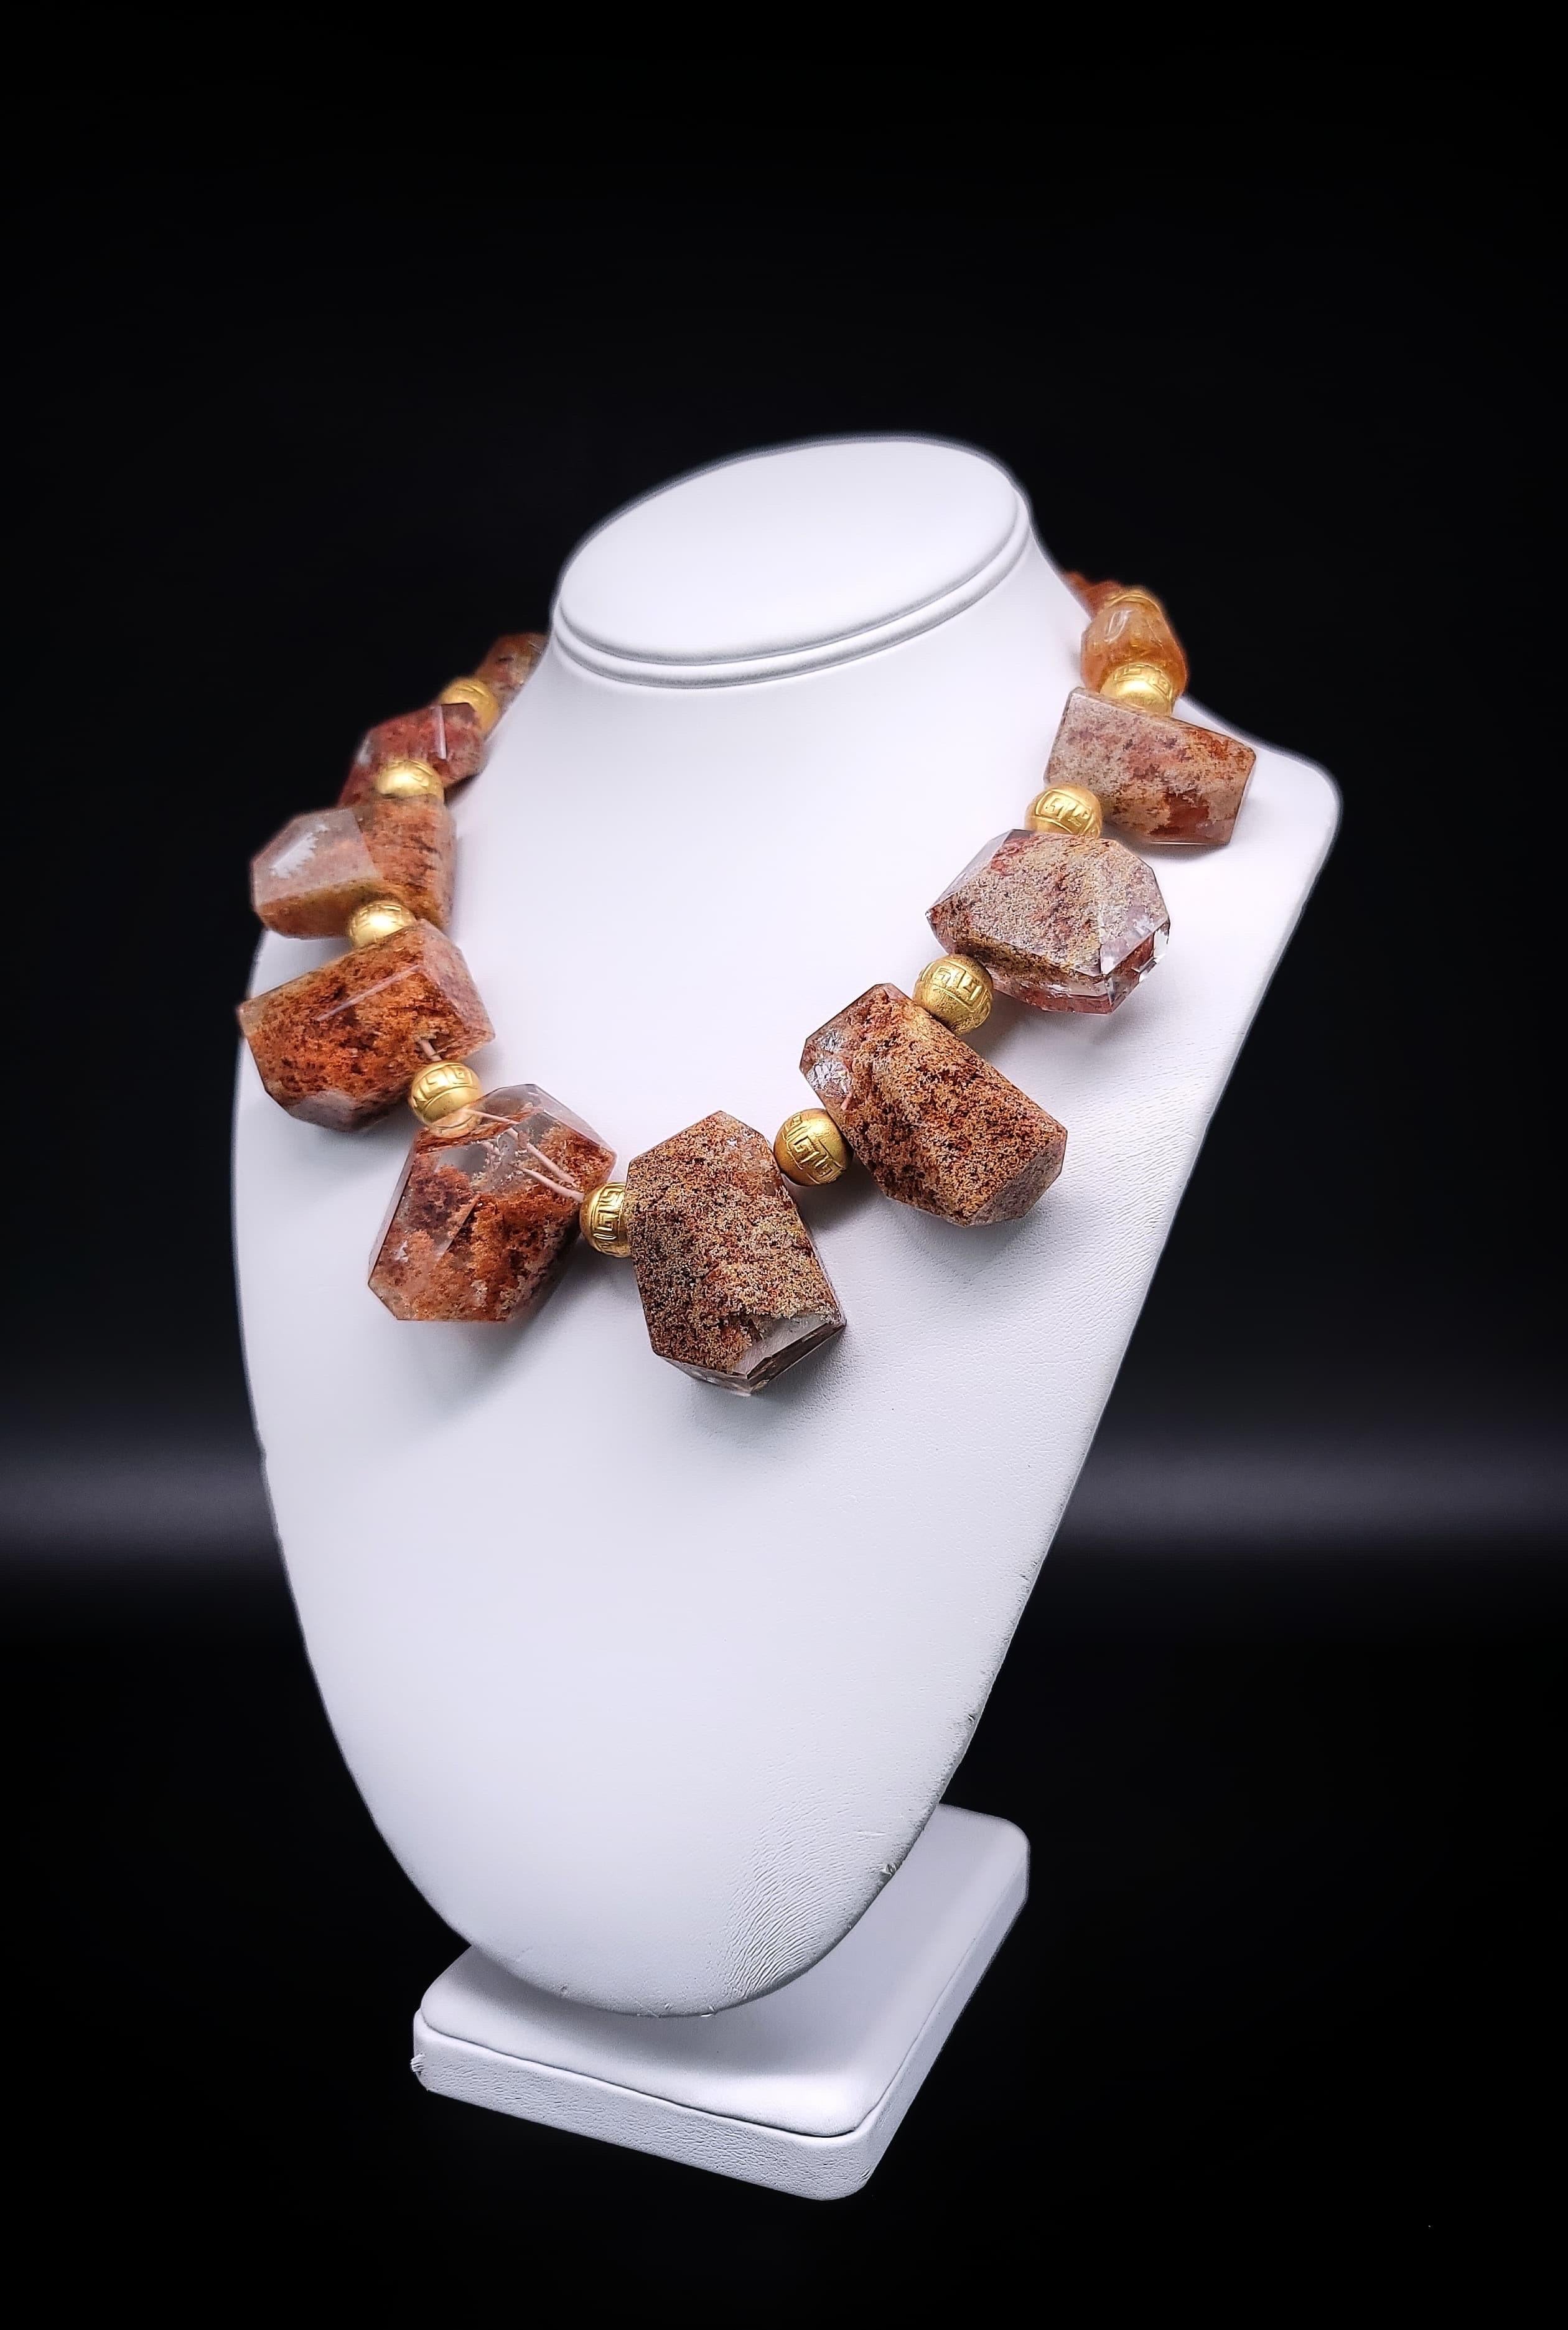 One-of-a-Kind

An extremely fine example of Garden Quartz aka Lodolite
which can only be found in the Minas Geras region of
Brazil and the stones in this highly polished necklace
sought after by collectors, as well as spiritual practitioners
who